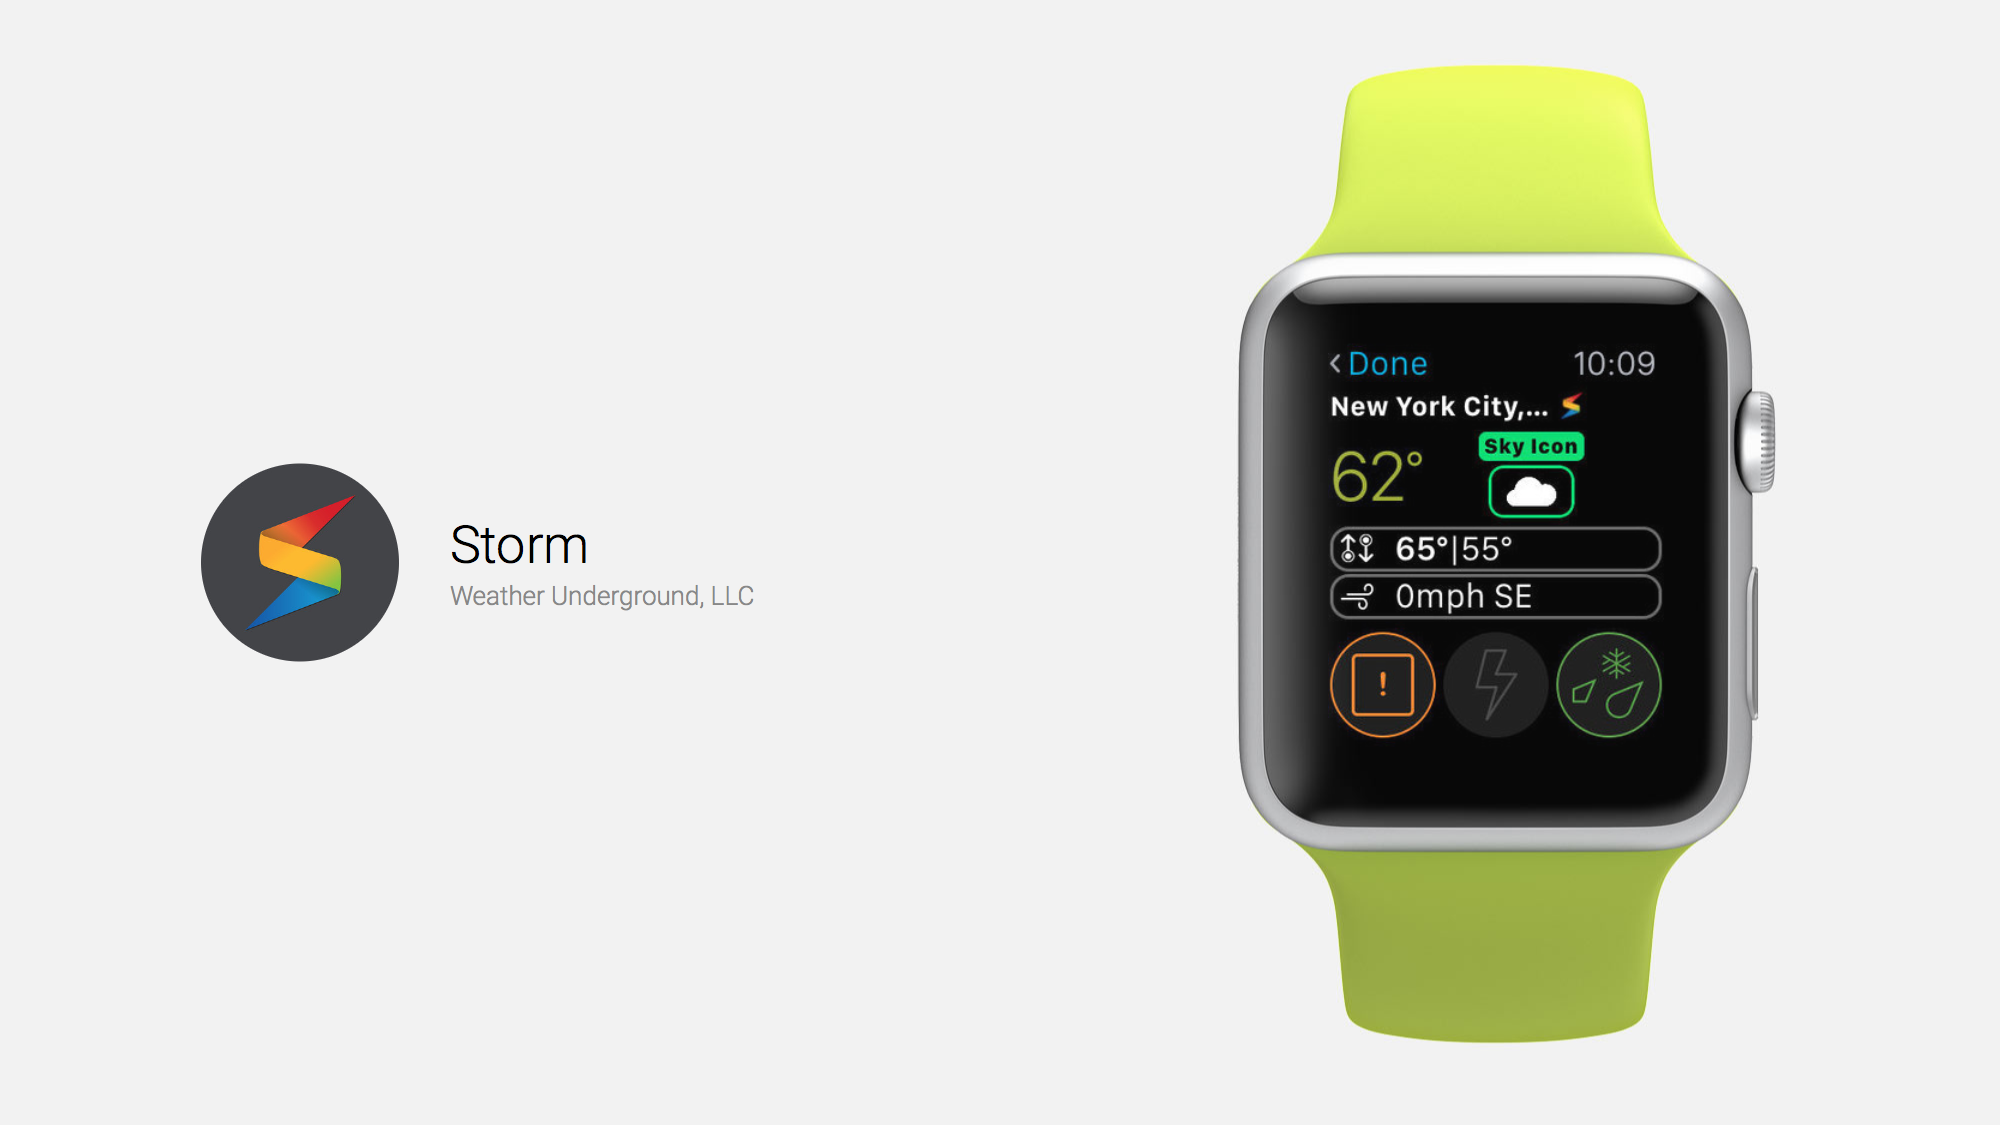 Storm Offers a Useful Weather Complication on the Apple Watch